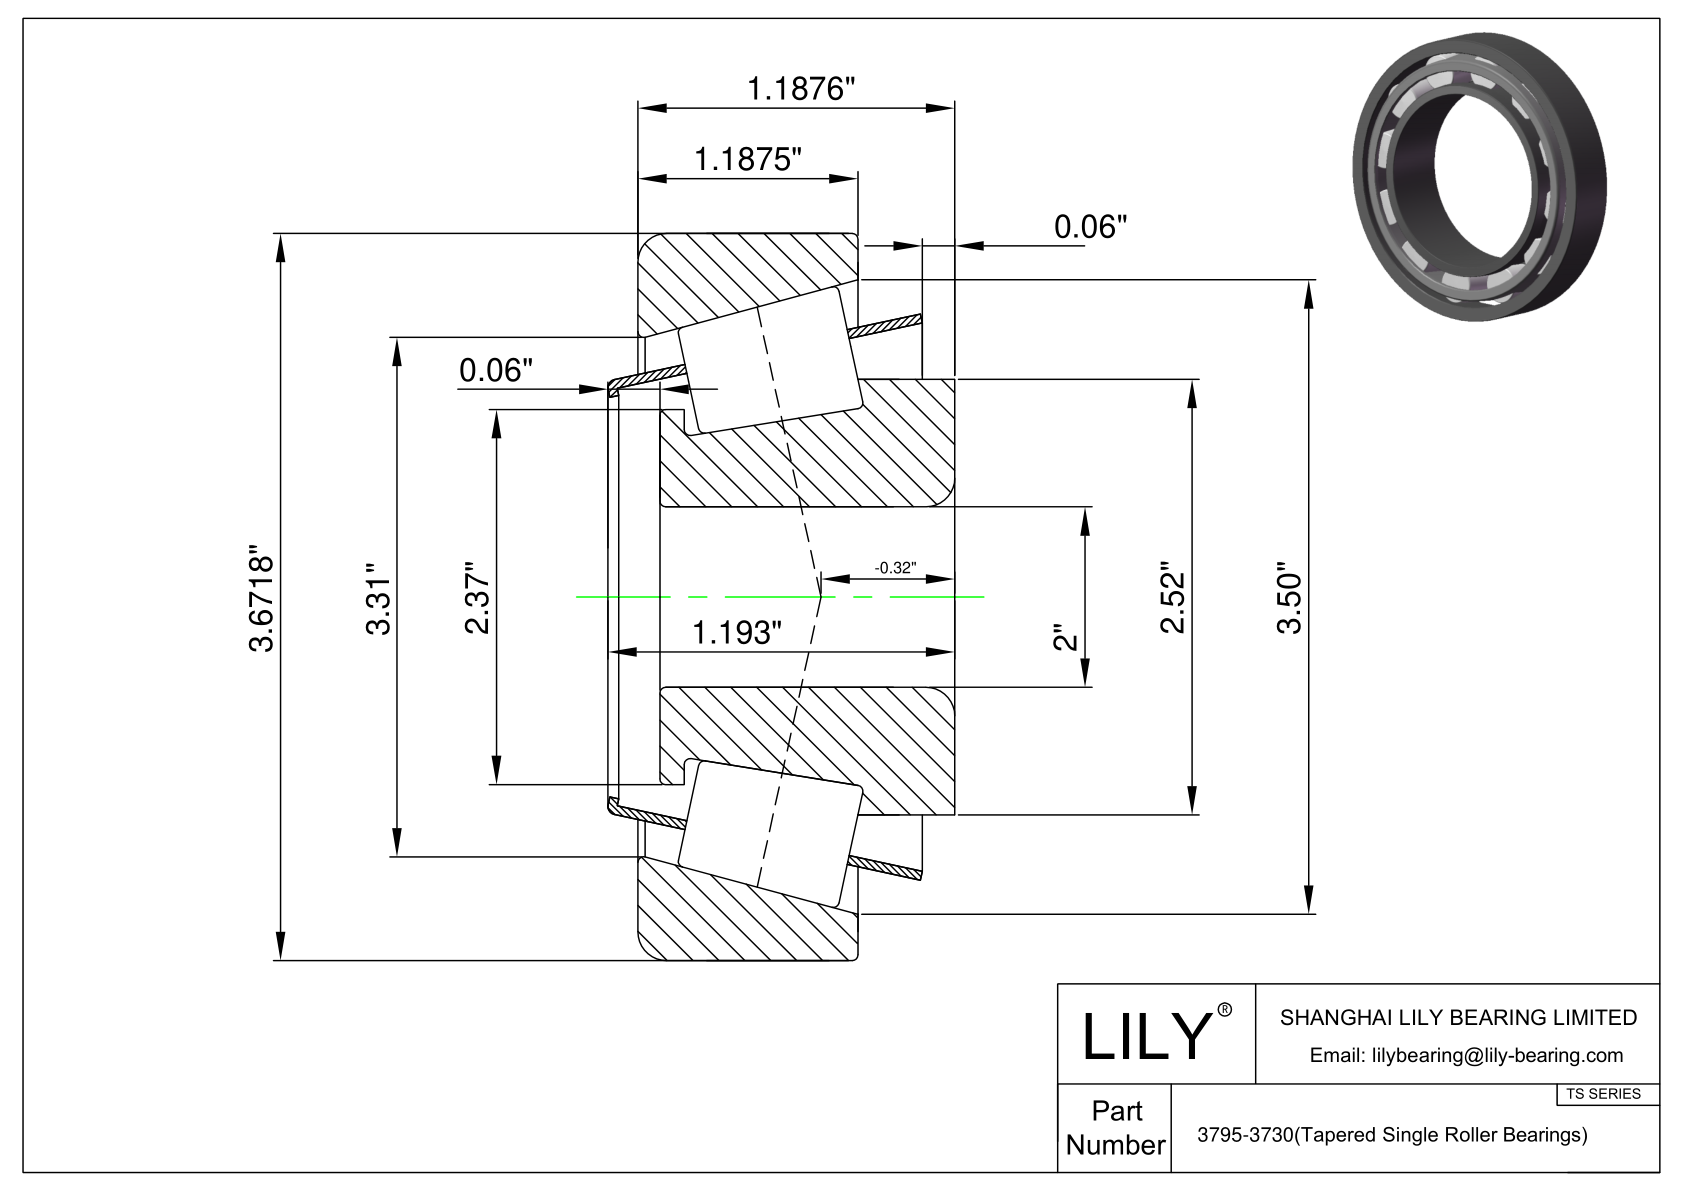 3795-3730 TS (Tapered Single Roller Bearings) (Imperial) cad drawing